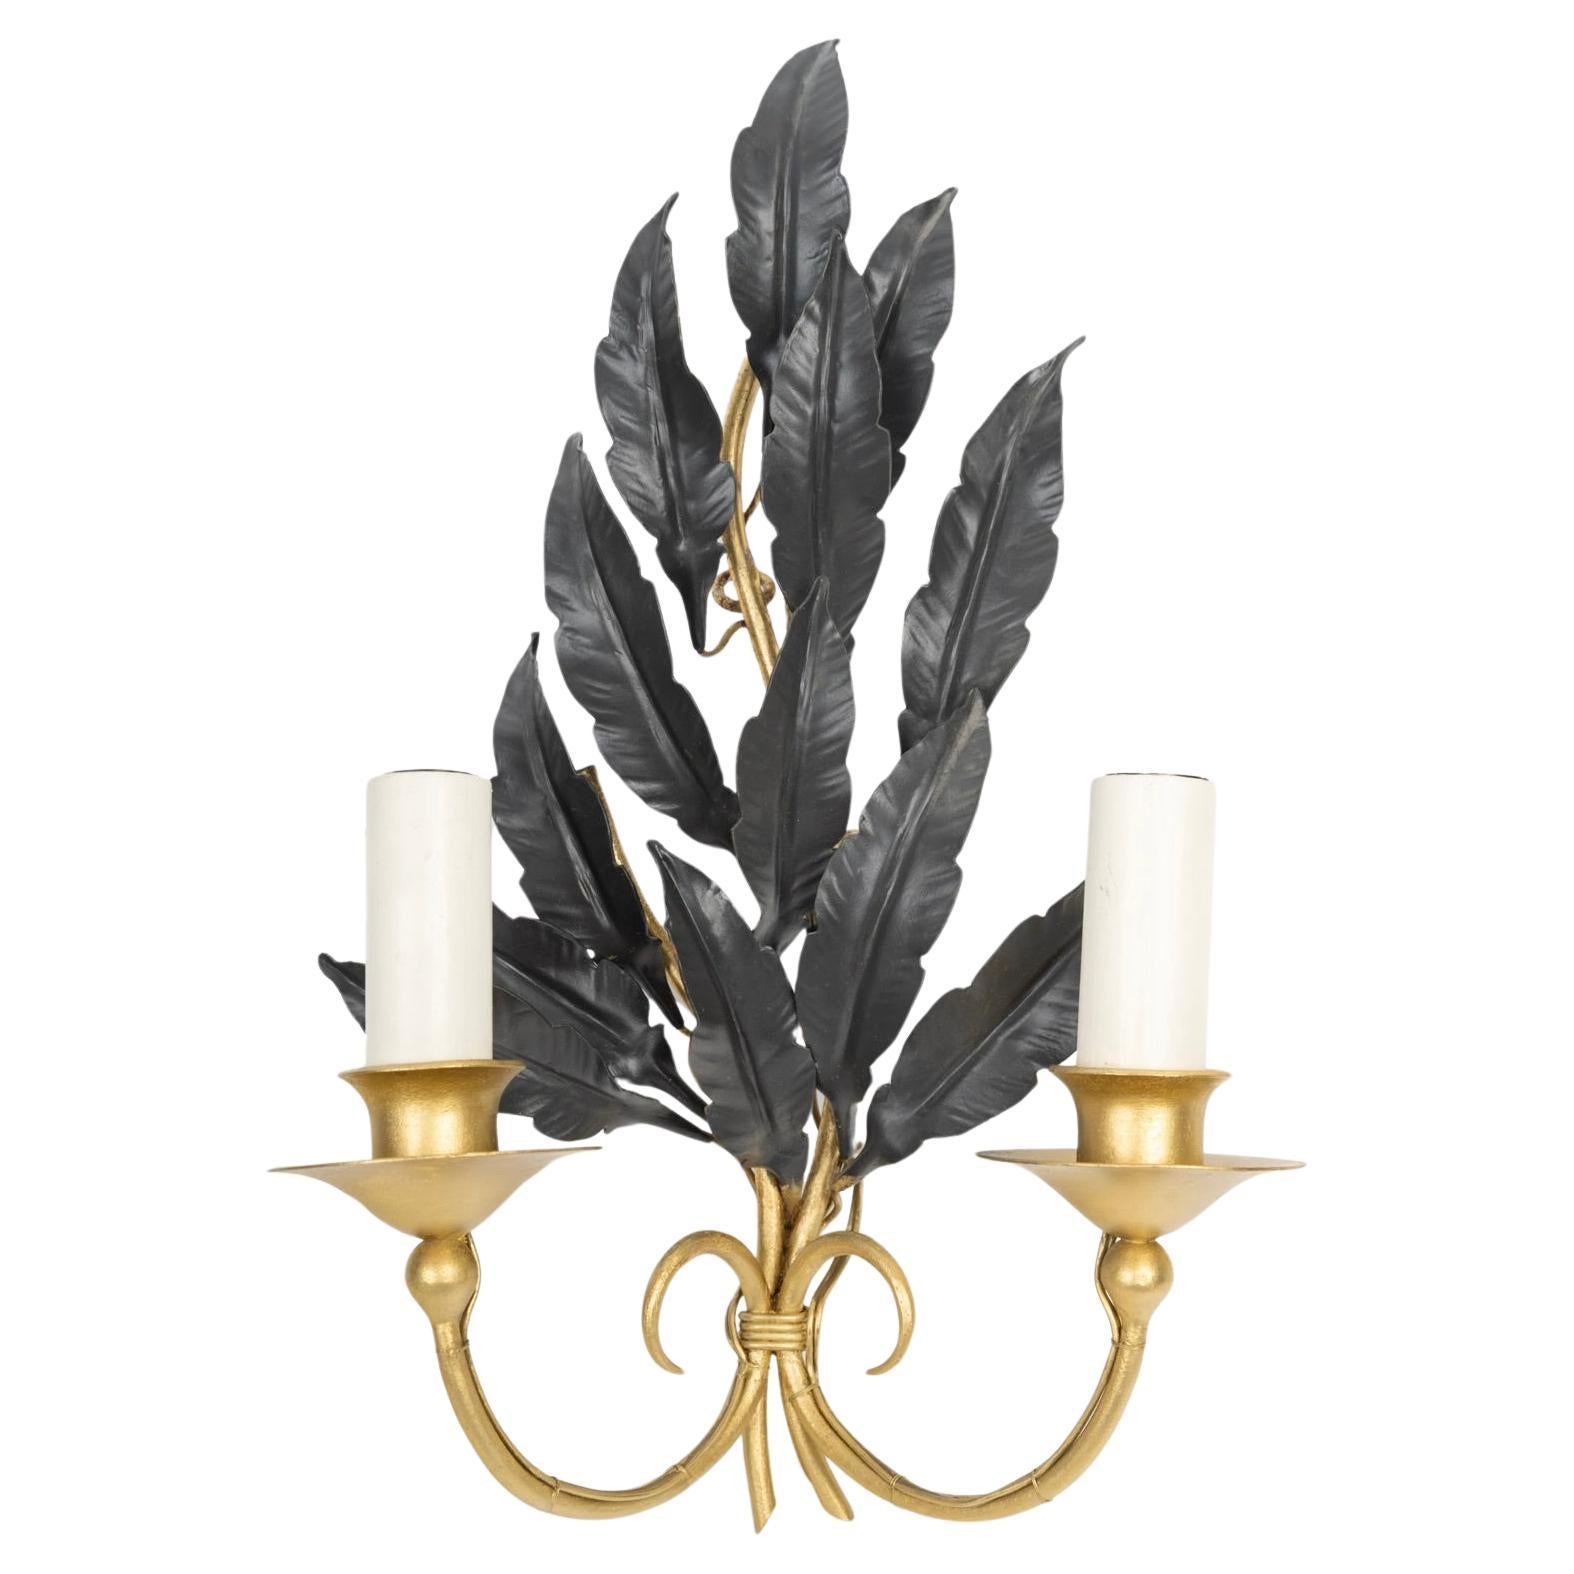 Composed of a gilded metal base with branches covered with oak leaves in blackened metal.
On the lower part, two small arms of light are distributed on either side of the sconce and covered with two cream-colored luminous candles, highlighted by